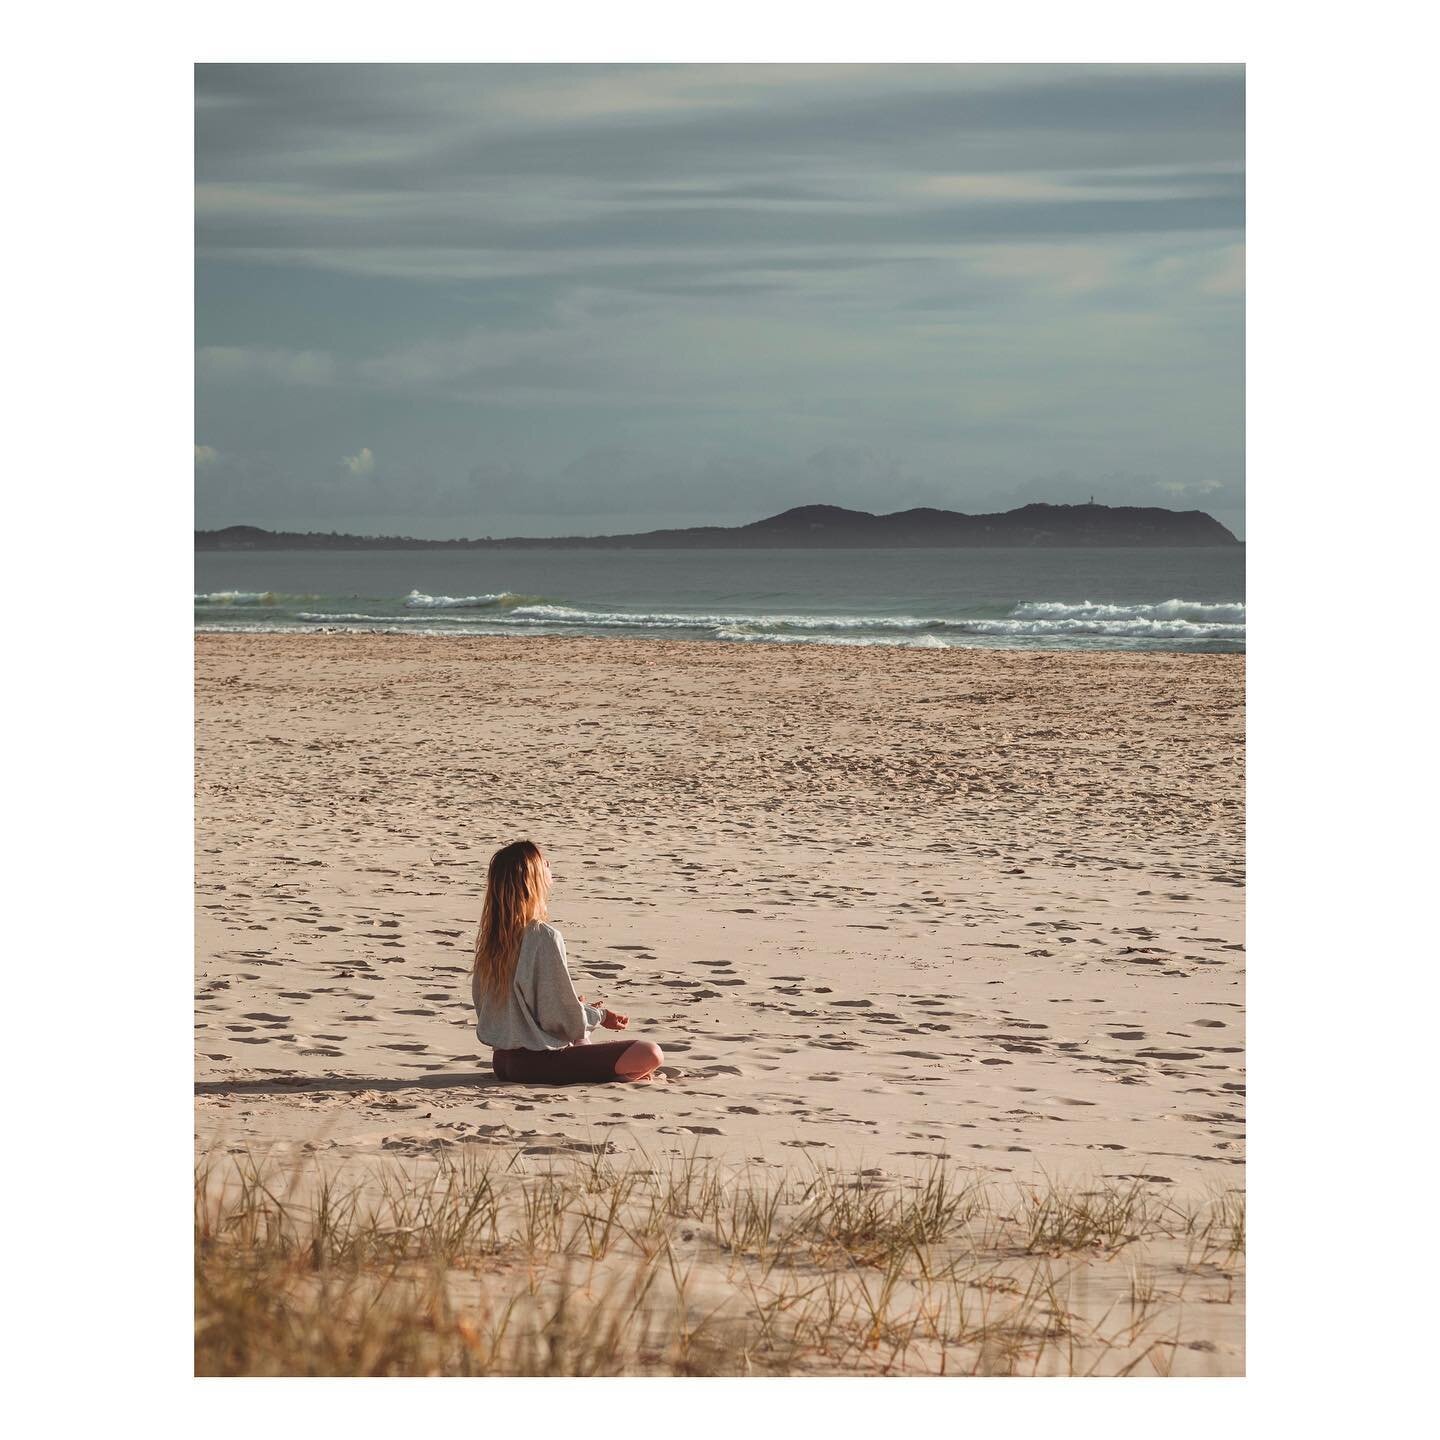 &bull;GIFT FROM THE SEA: A RETREAT&bull;
WHY DO WE RETREAT?
Are you feeling stuck in your day-to-day routine? Are you feeling a shift coming, but can&rsquo;t hear your heart beyond the noise of your surroundings? Do you just need space to rest?
For t